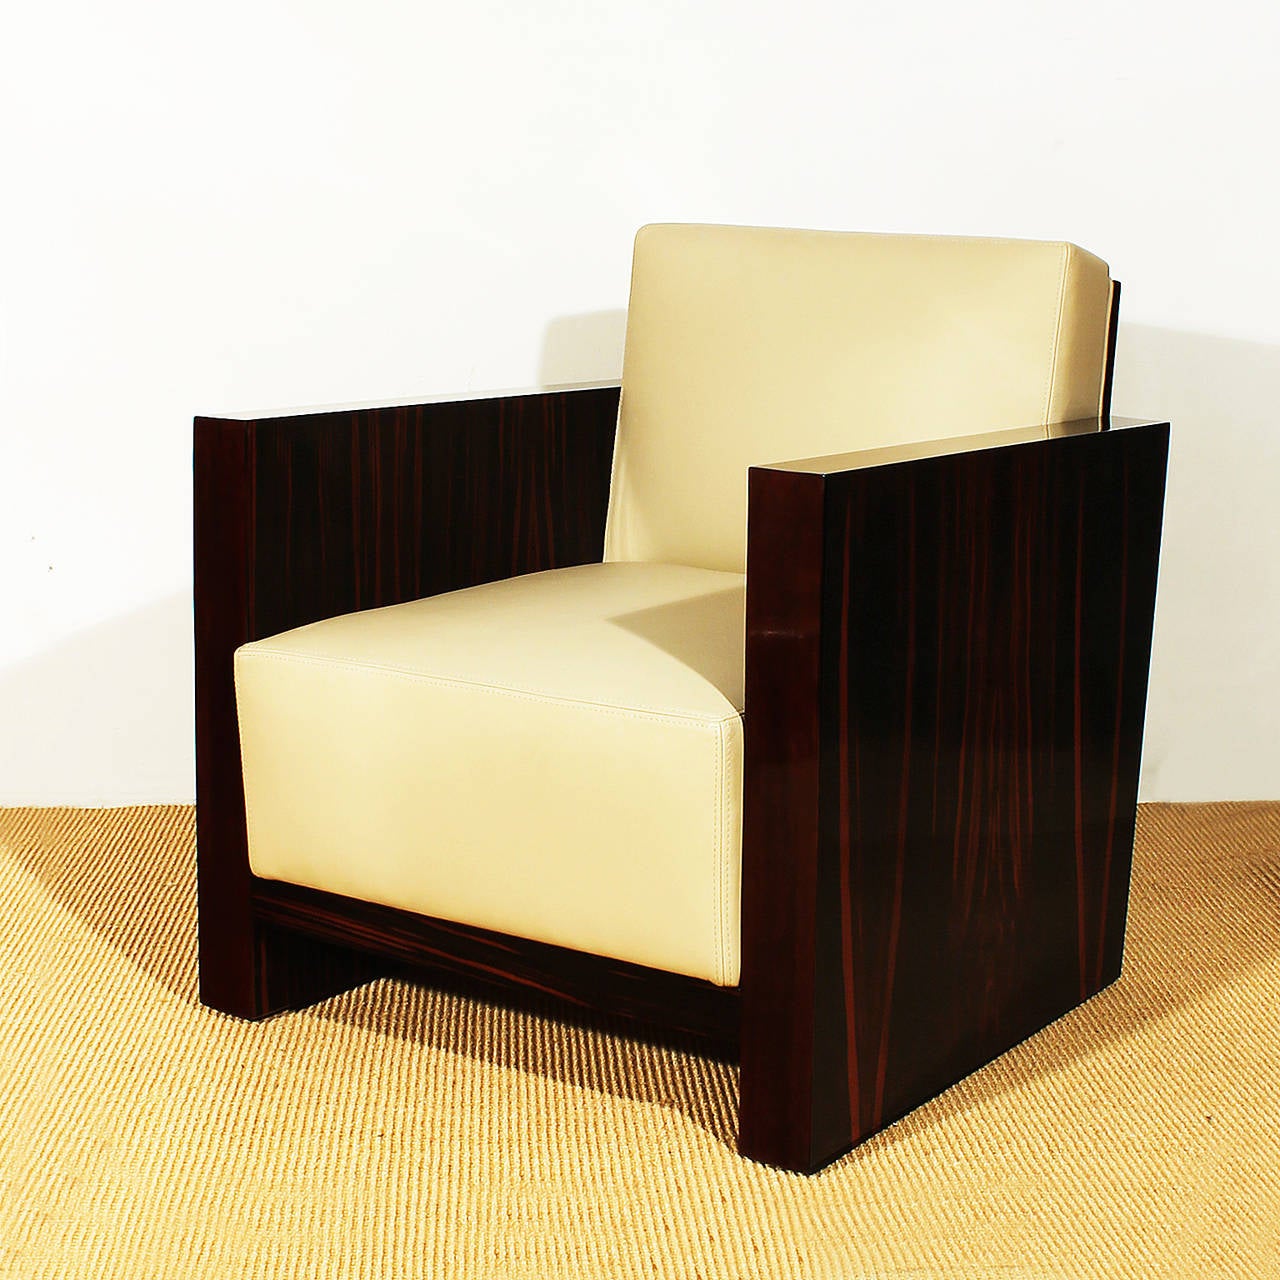 Splendid pair of Art Deco cubist armchairs, solid oak with differents veneers, one with mahogany and Macassar ebony veneer and the other one with mahogany and zebra wood veneer, french polish, new taupe grey leather upholstery, saddle point